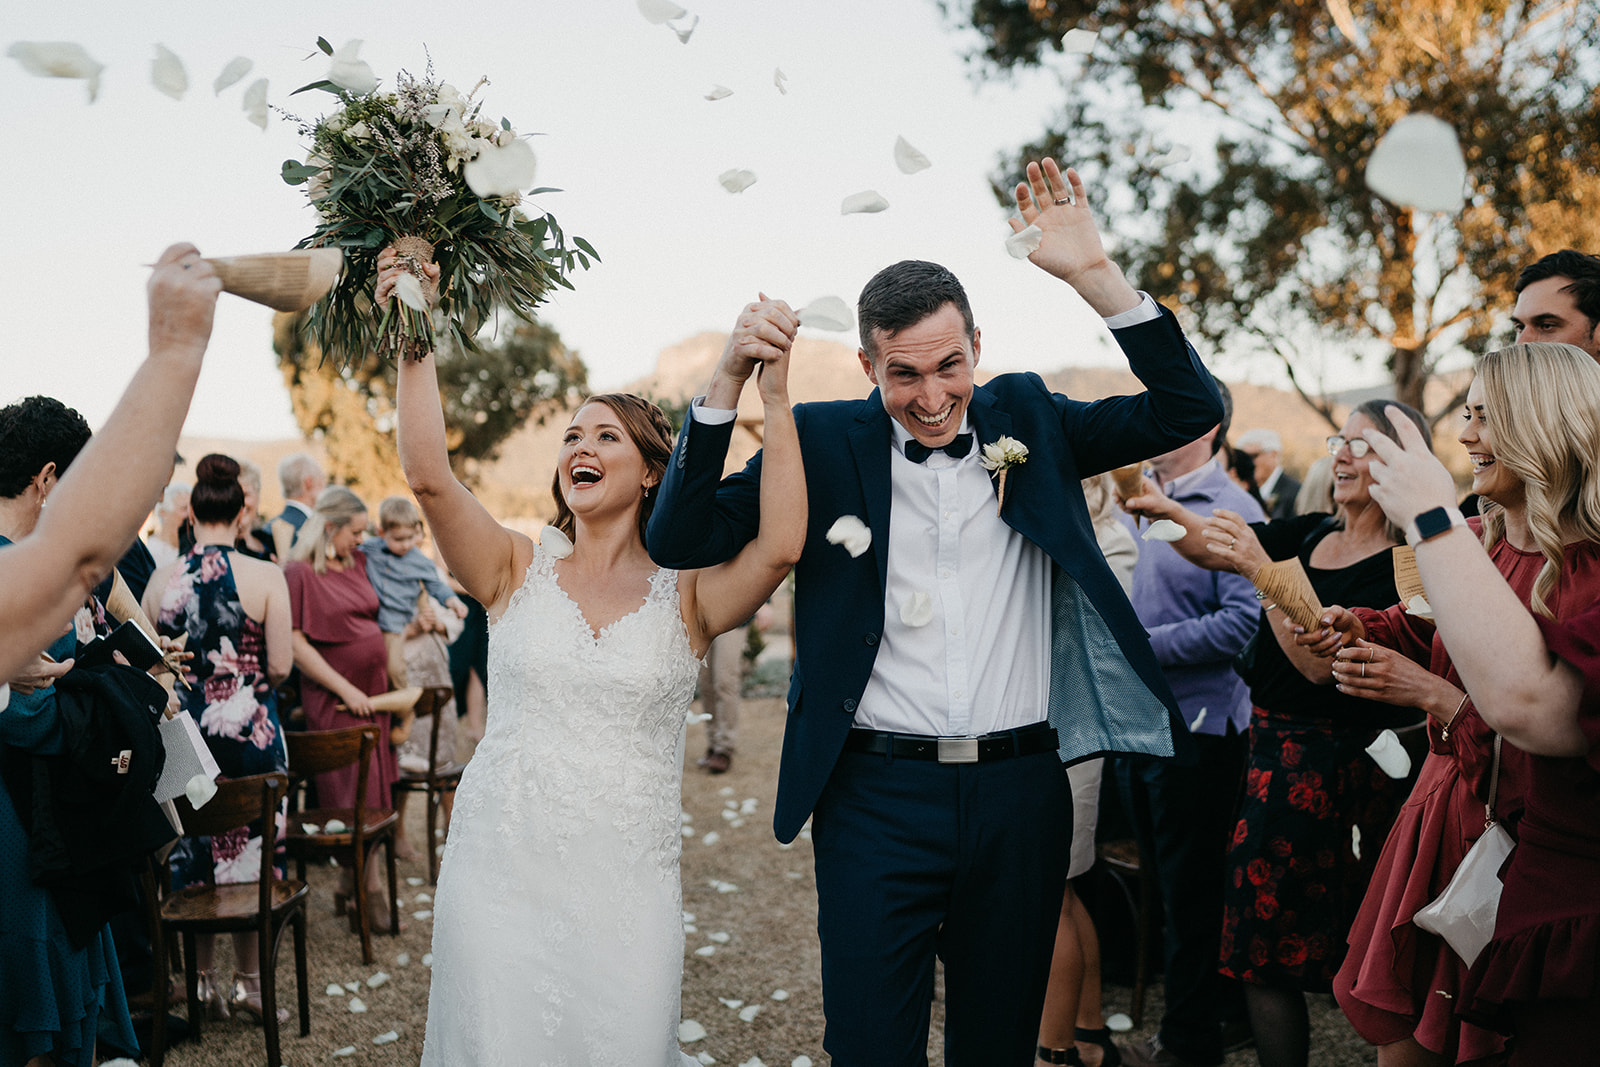 wedding guests showering eco-confetti while bride and groom walked down the aisle